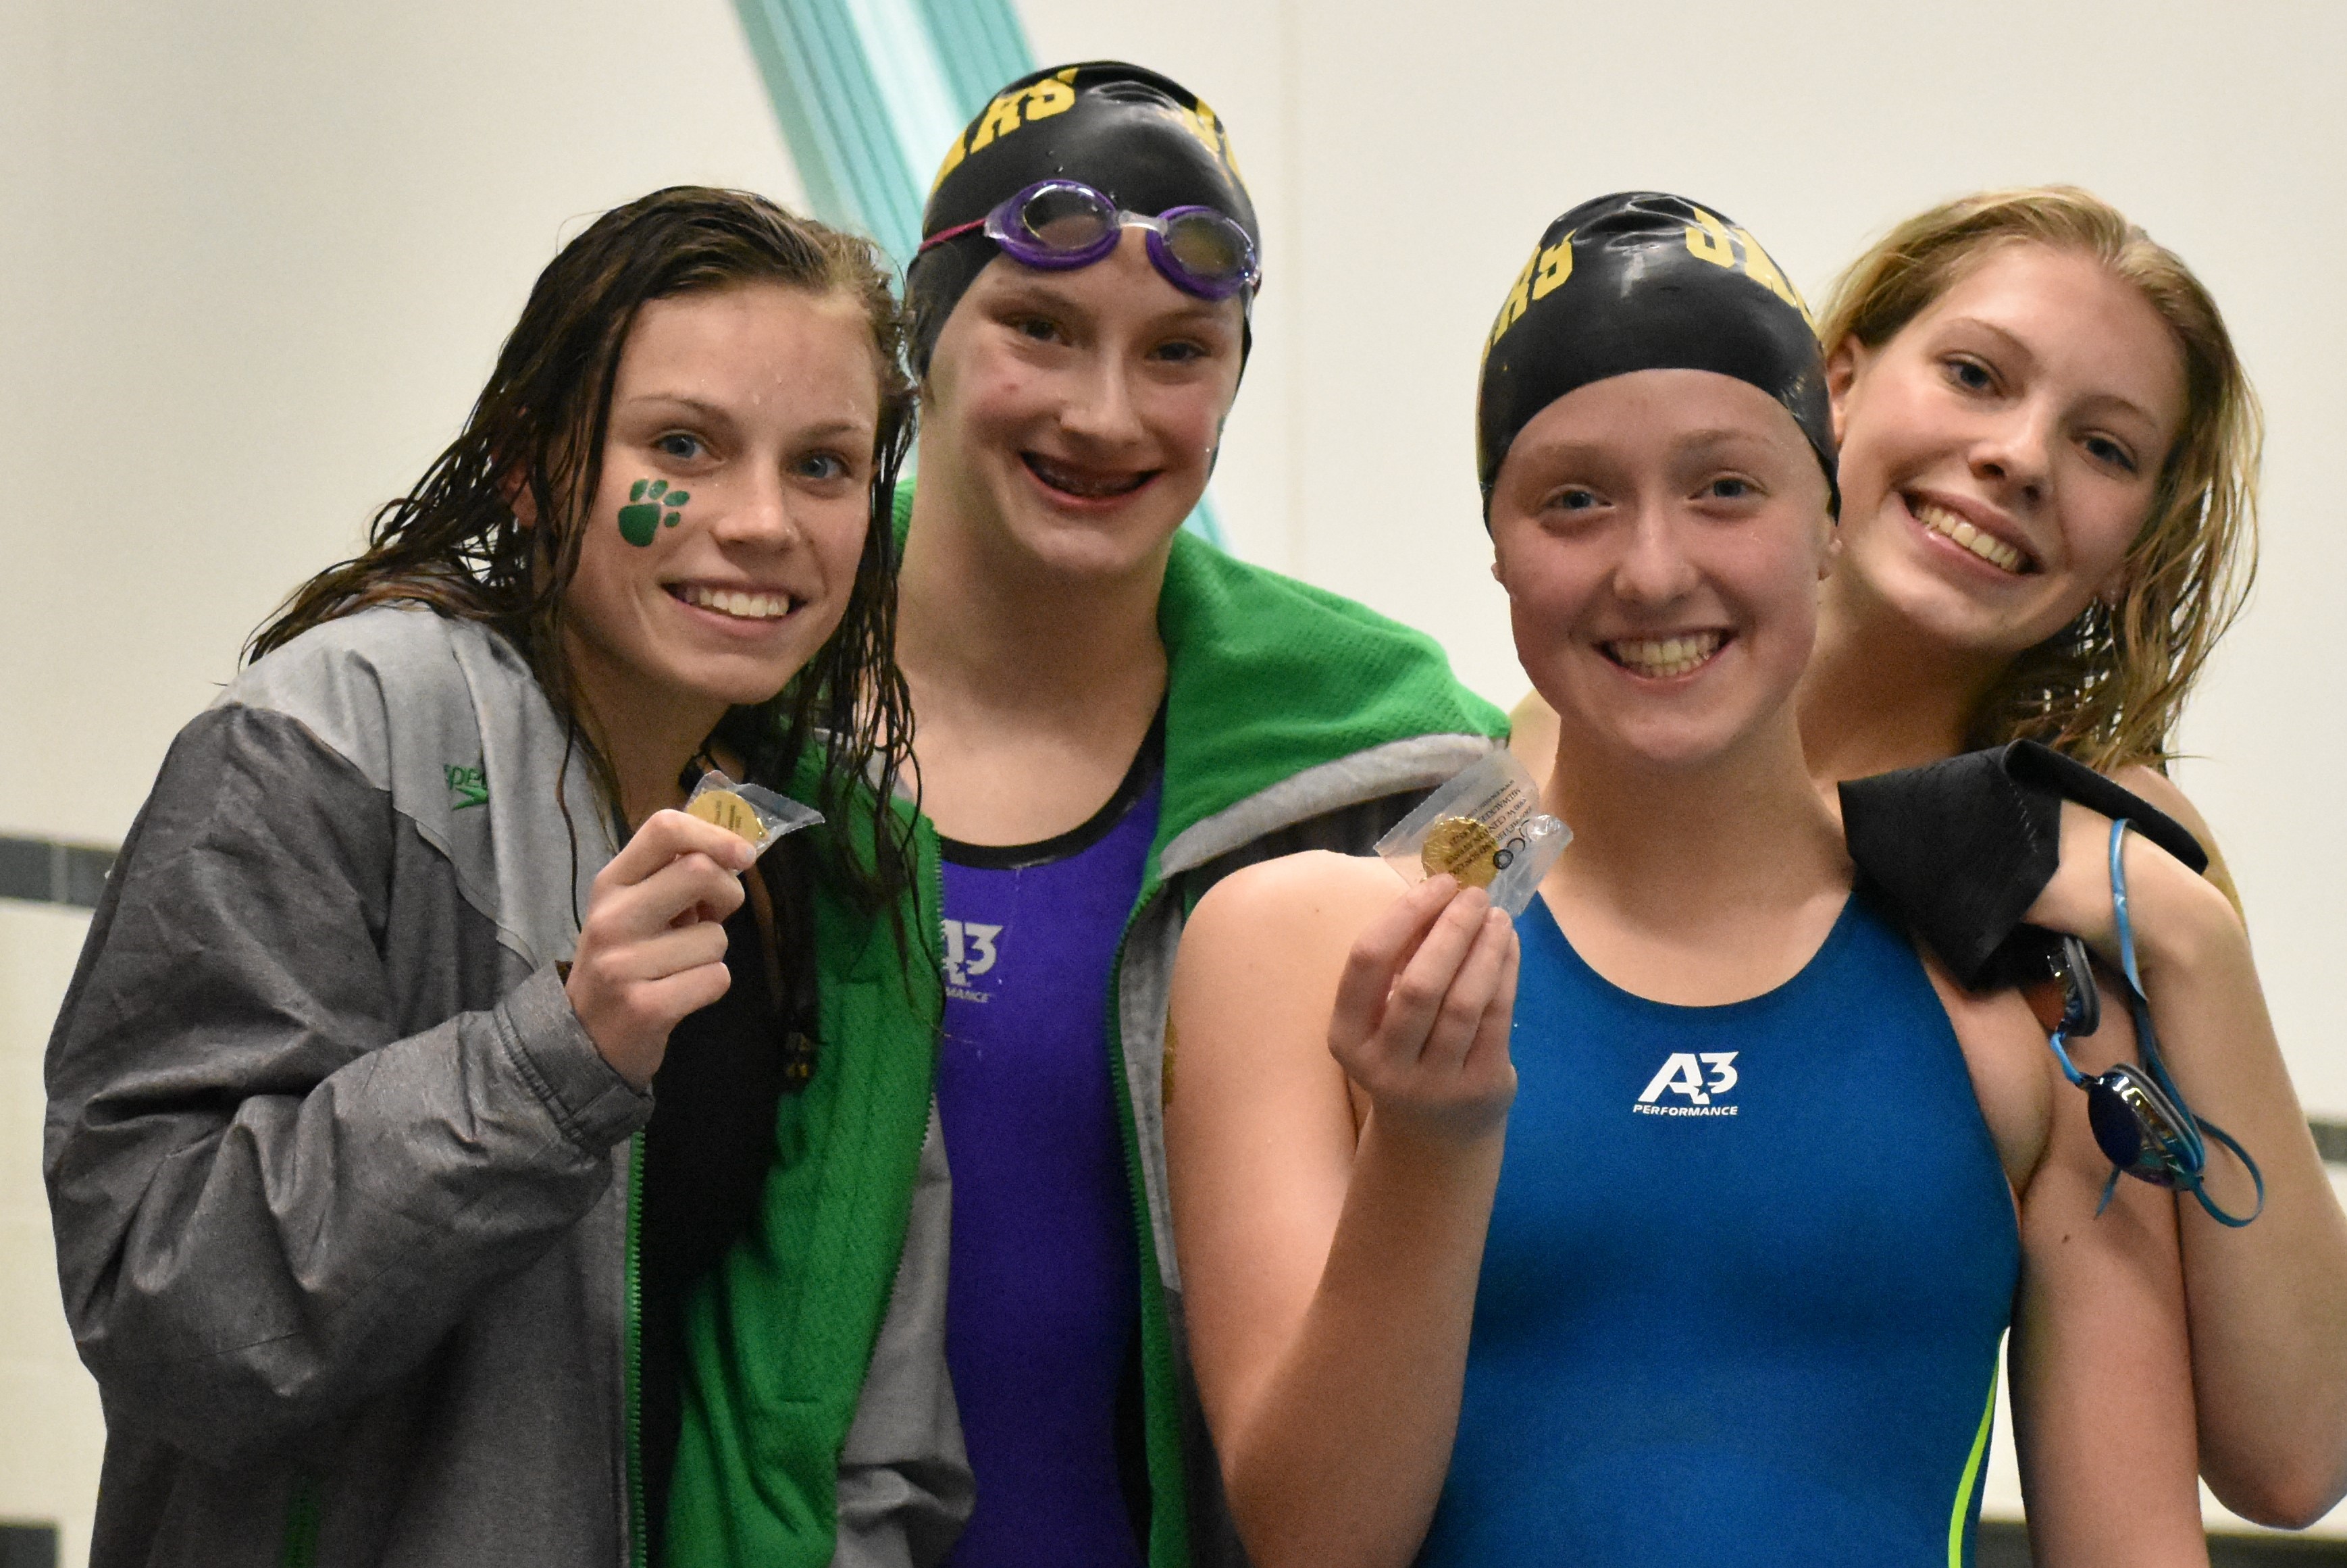 Domnick, Geurts, McNicoll, and Popp victorious at Sectionals